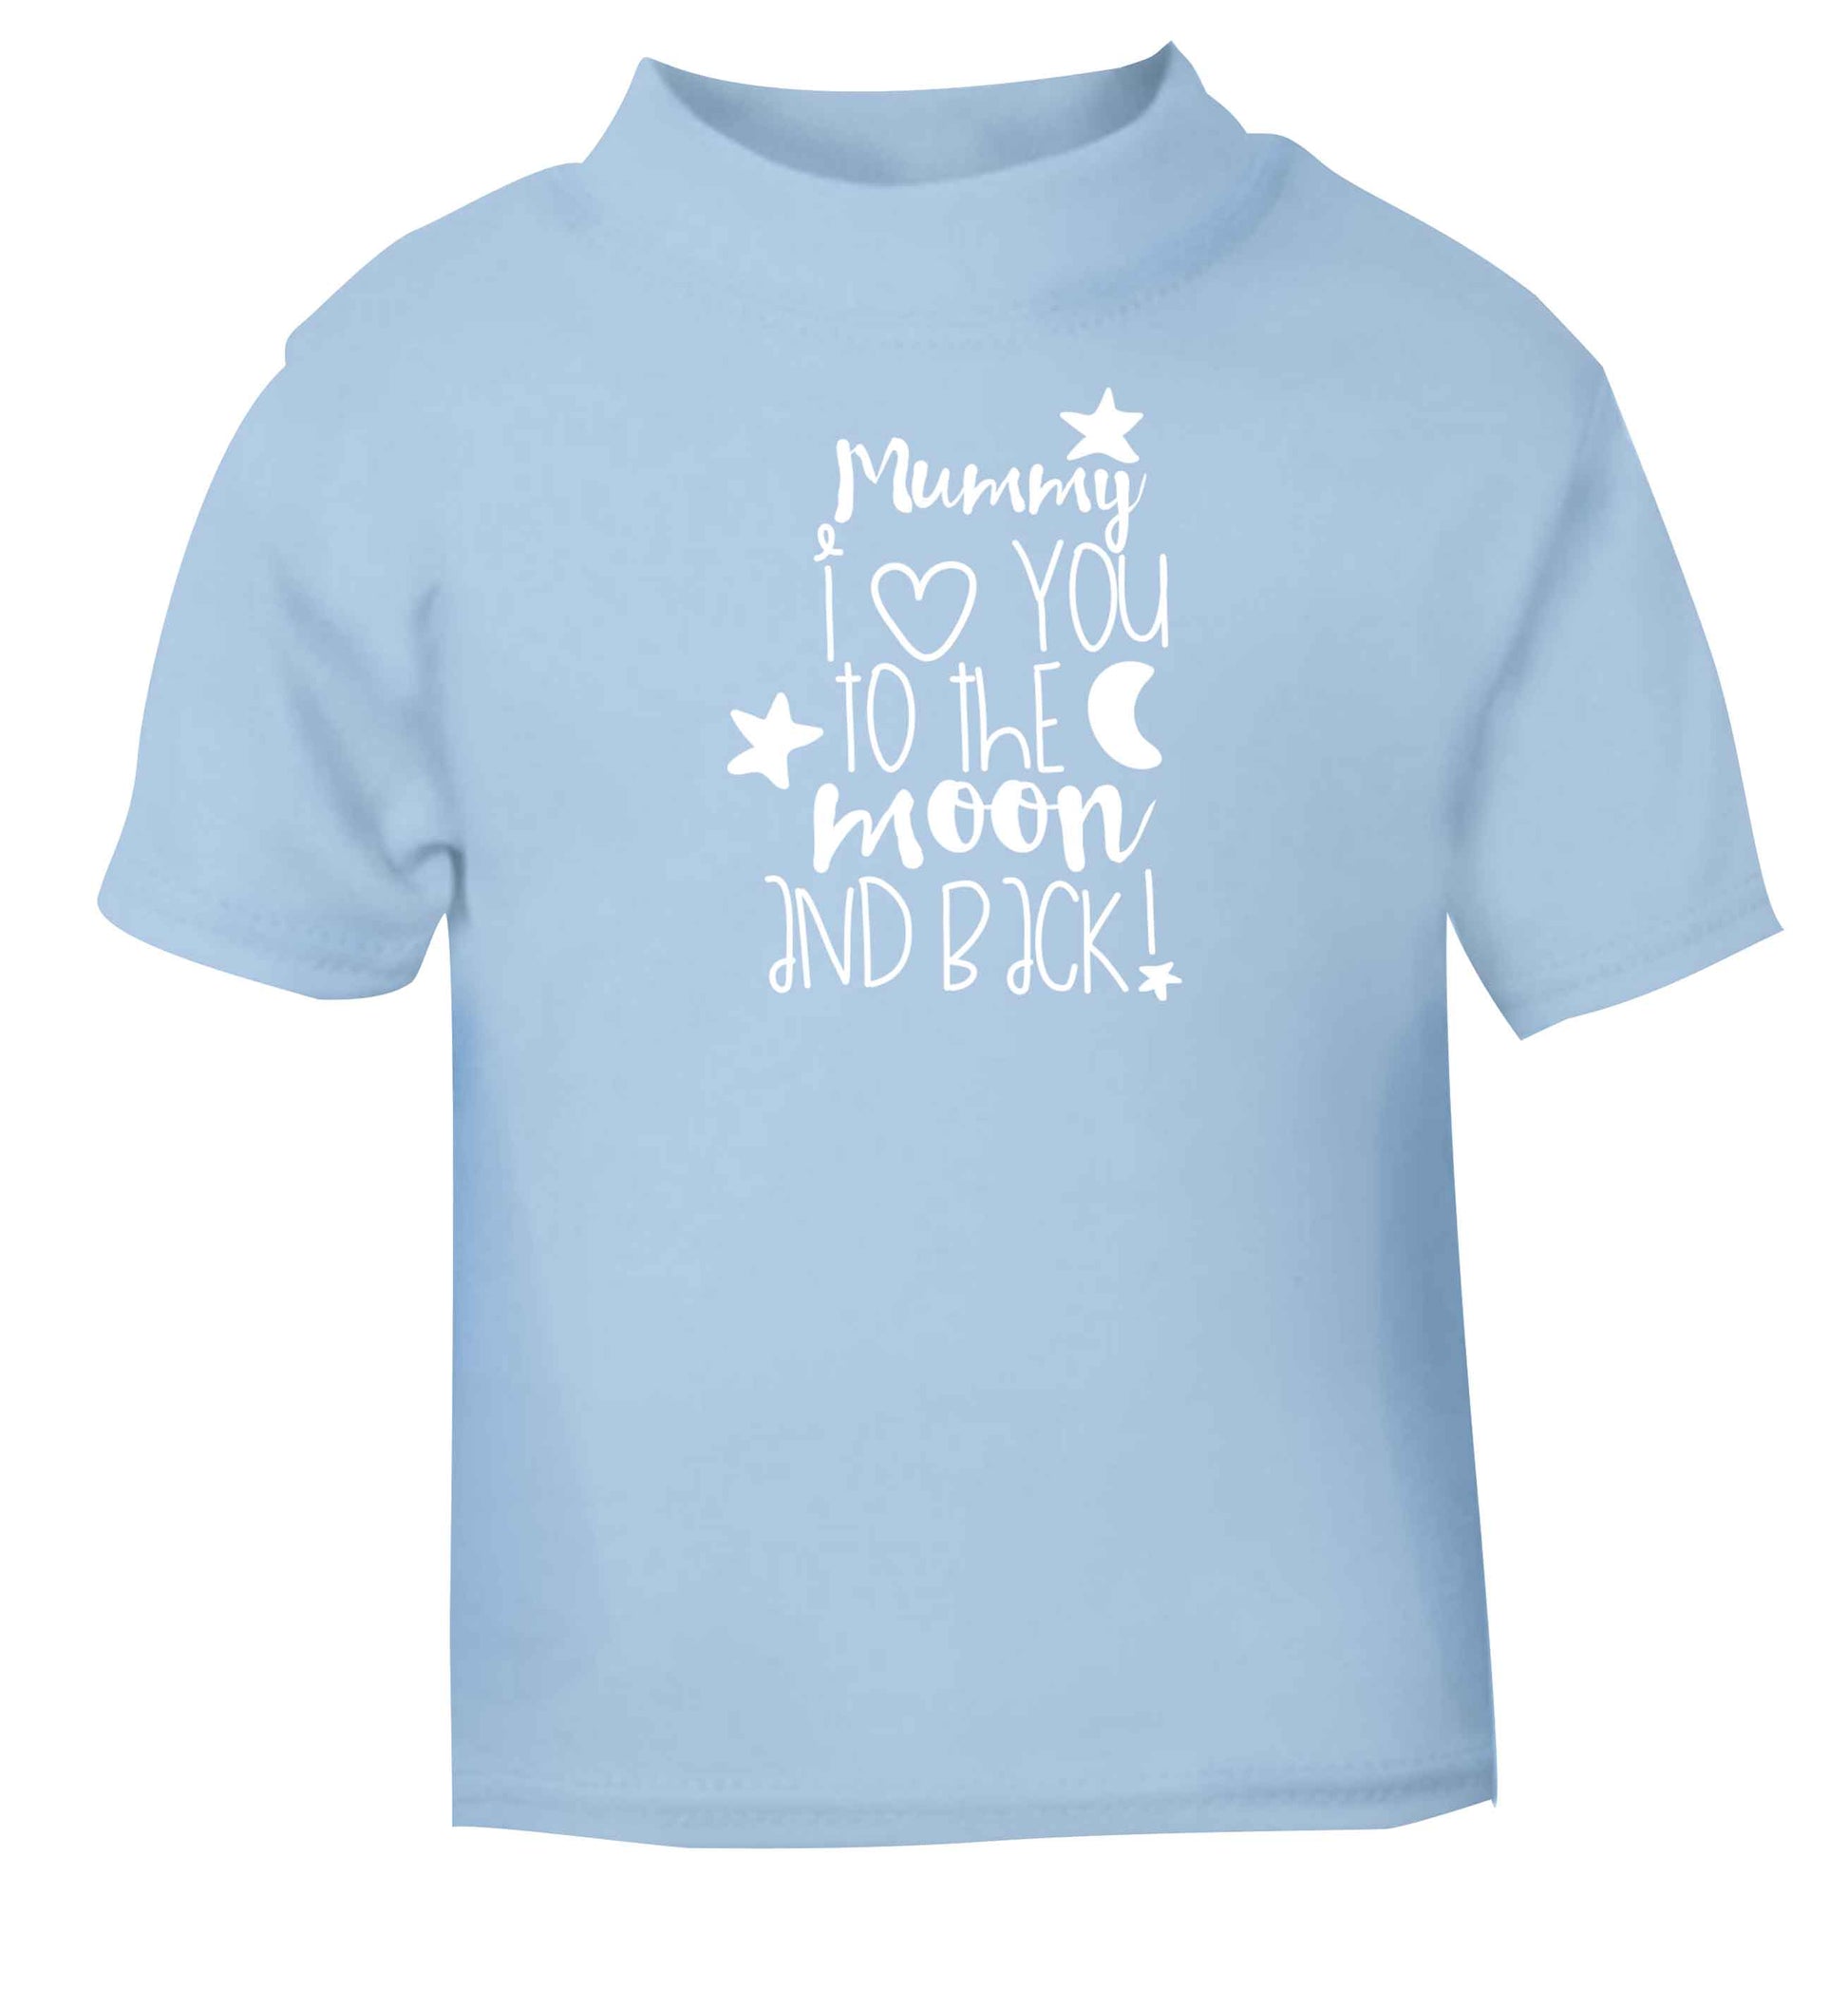 Mummy I love you to the moon and back light blue baby toddler Tshirt 2 Years